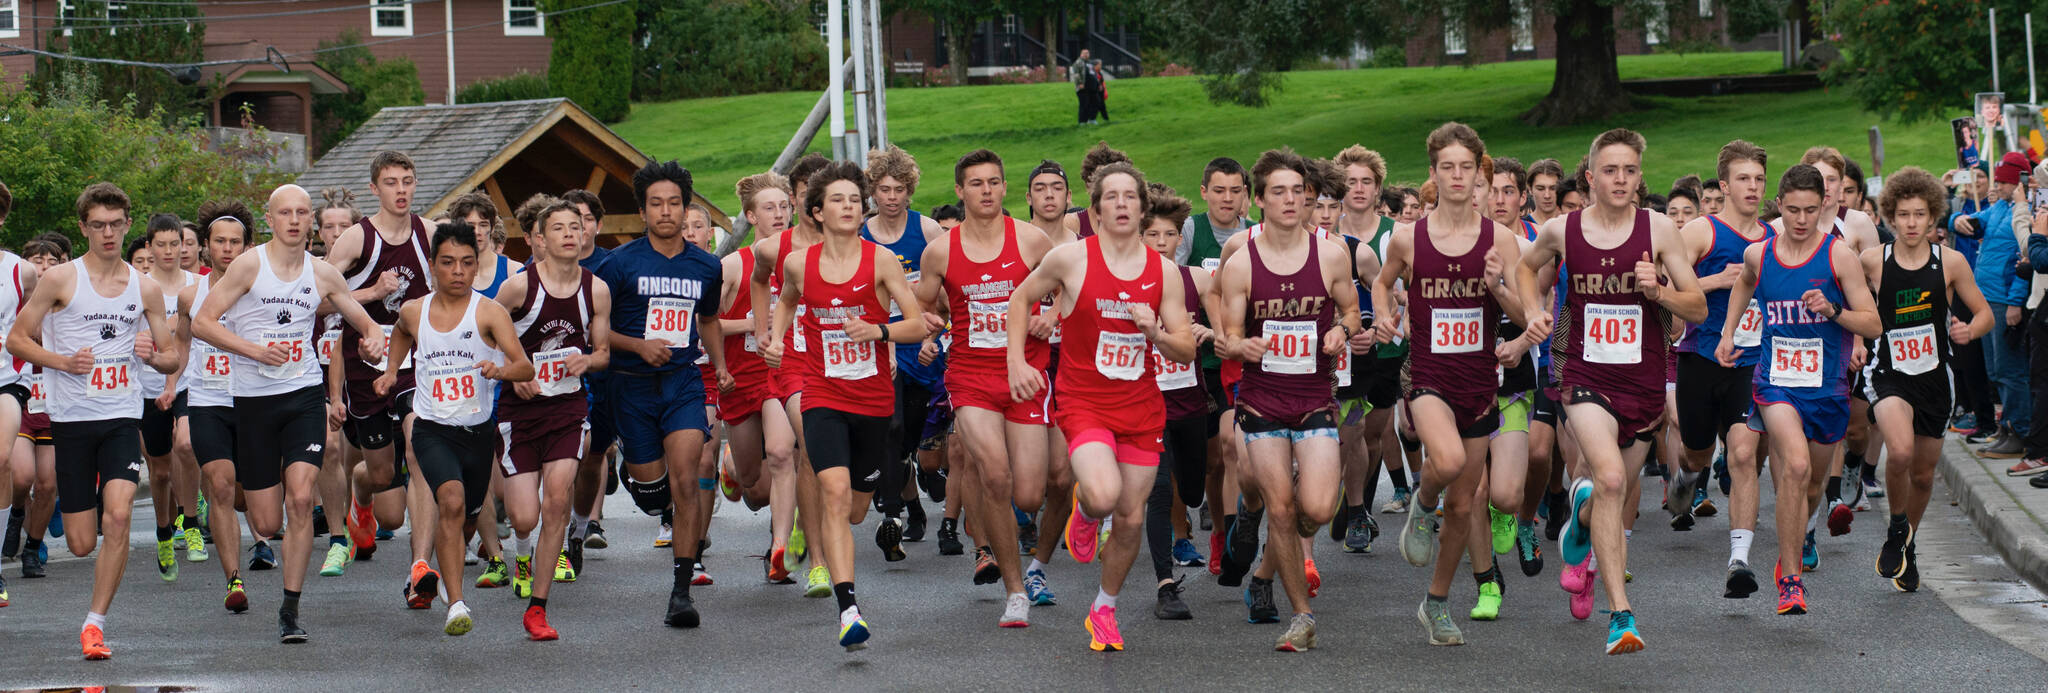 High school runners start the Sitka Invitational Boys 5K race on Saturday. The field included 150 runners in the boys field and 91 in the girls. (James Poulson / Sitka Sentinel)